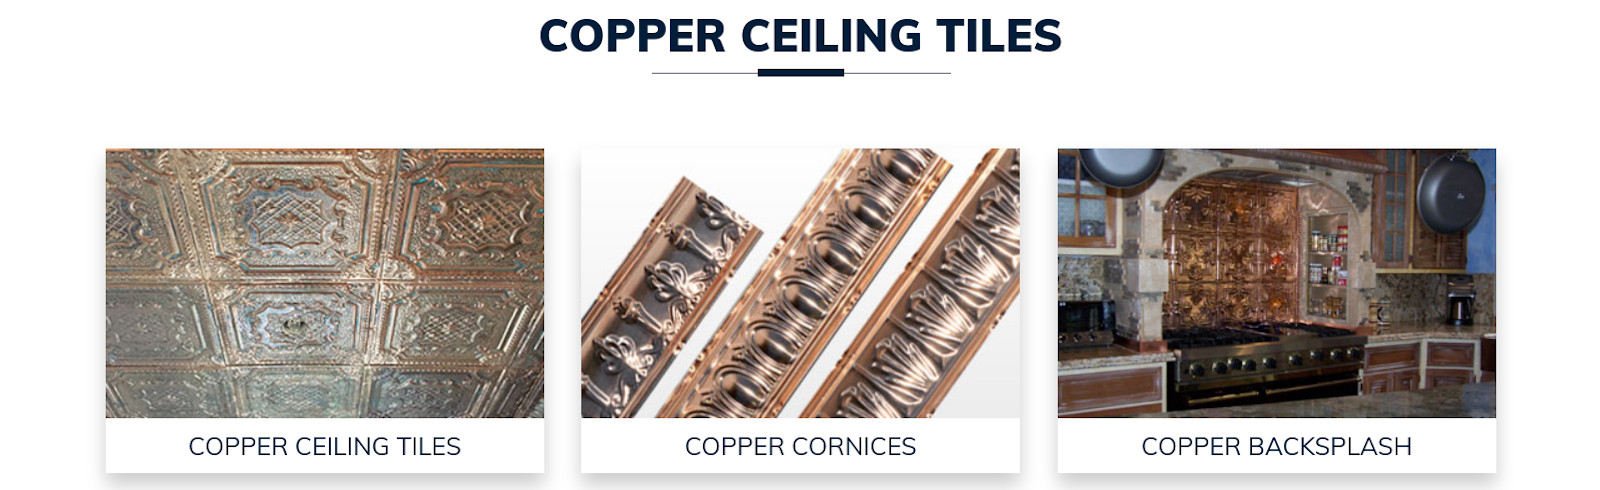 copper ceiling tiles reduced price